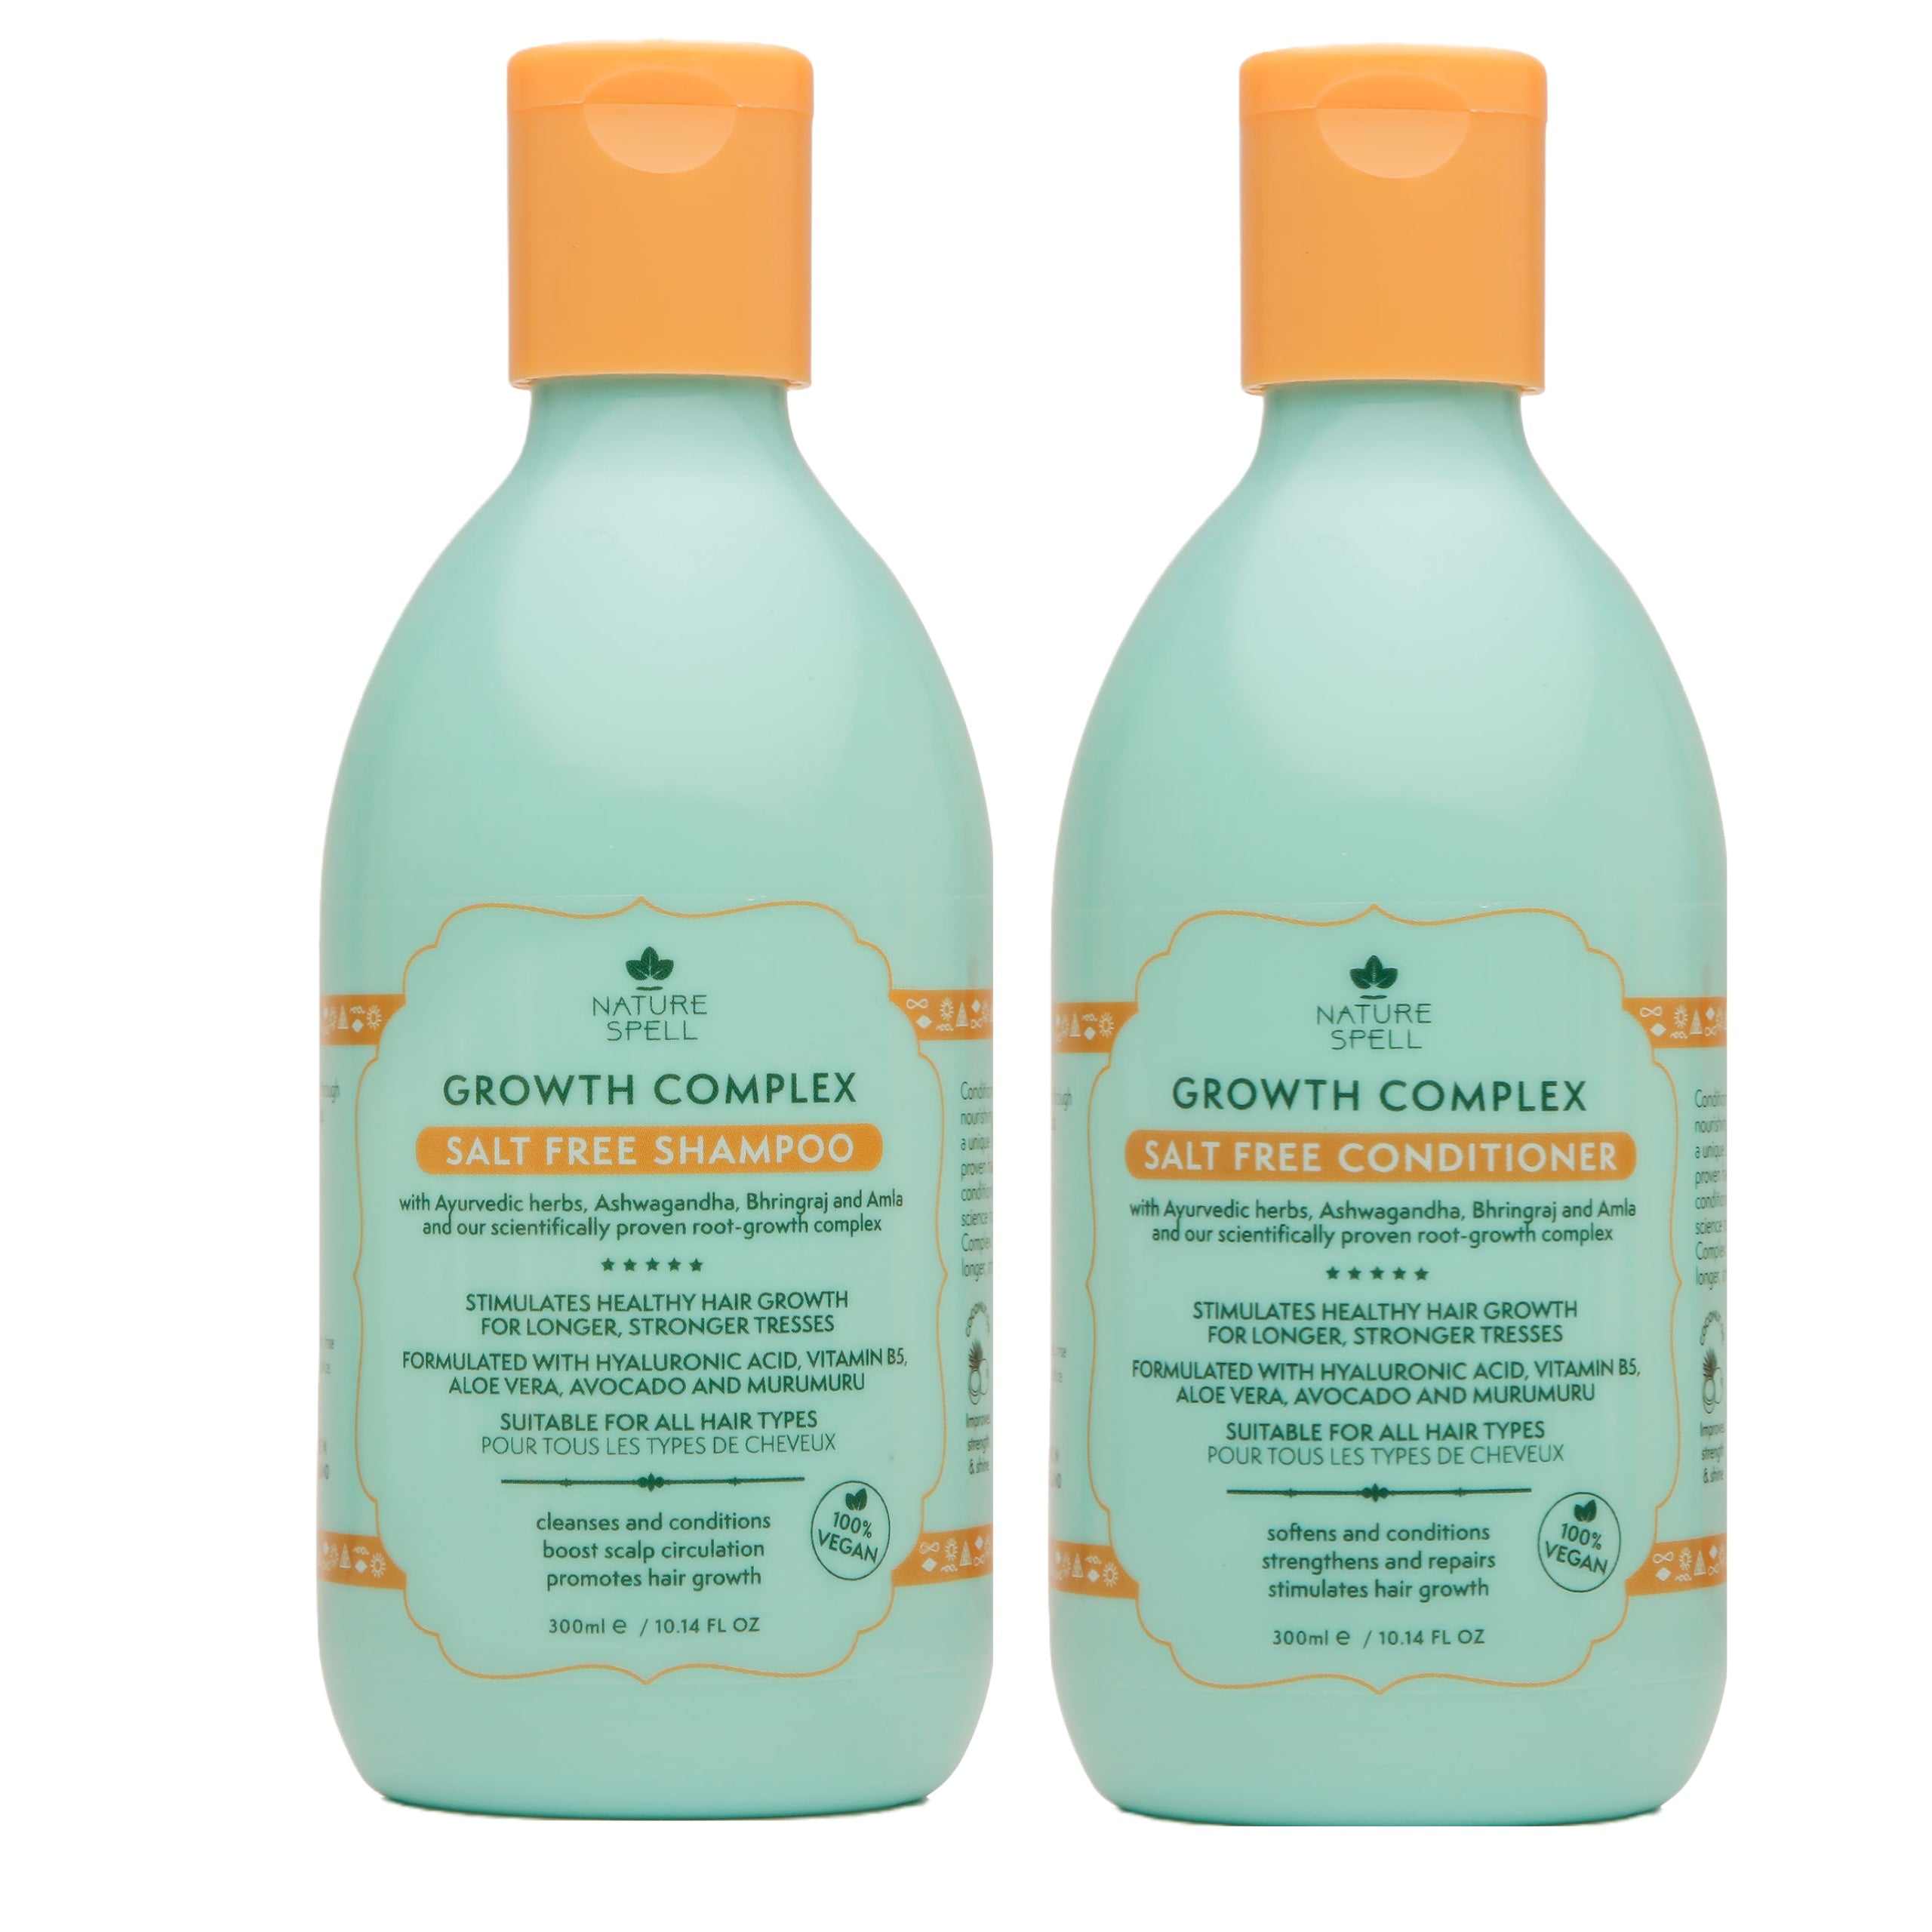 Growth Complex Salt Free Shampoo and Conditioner 300ml Duo